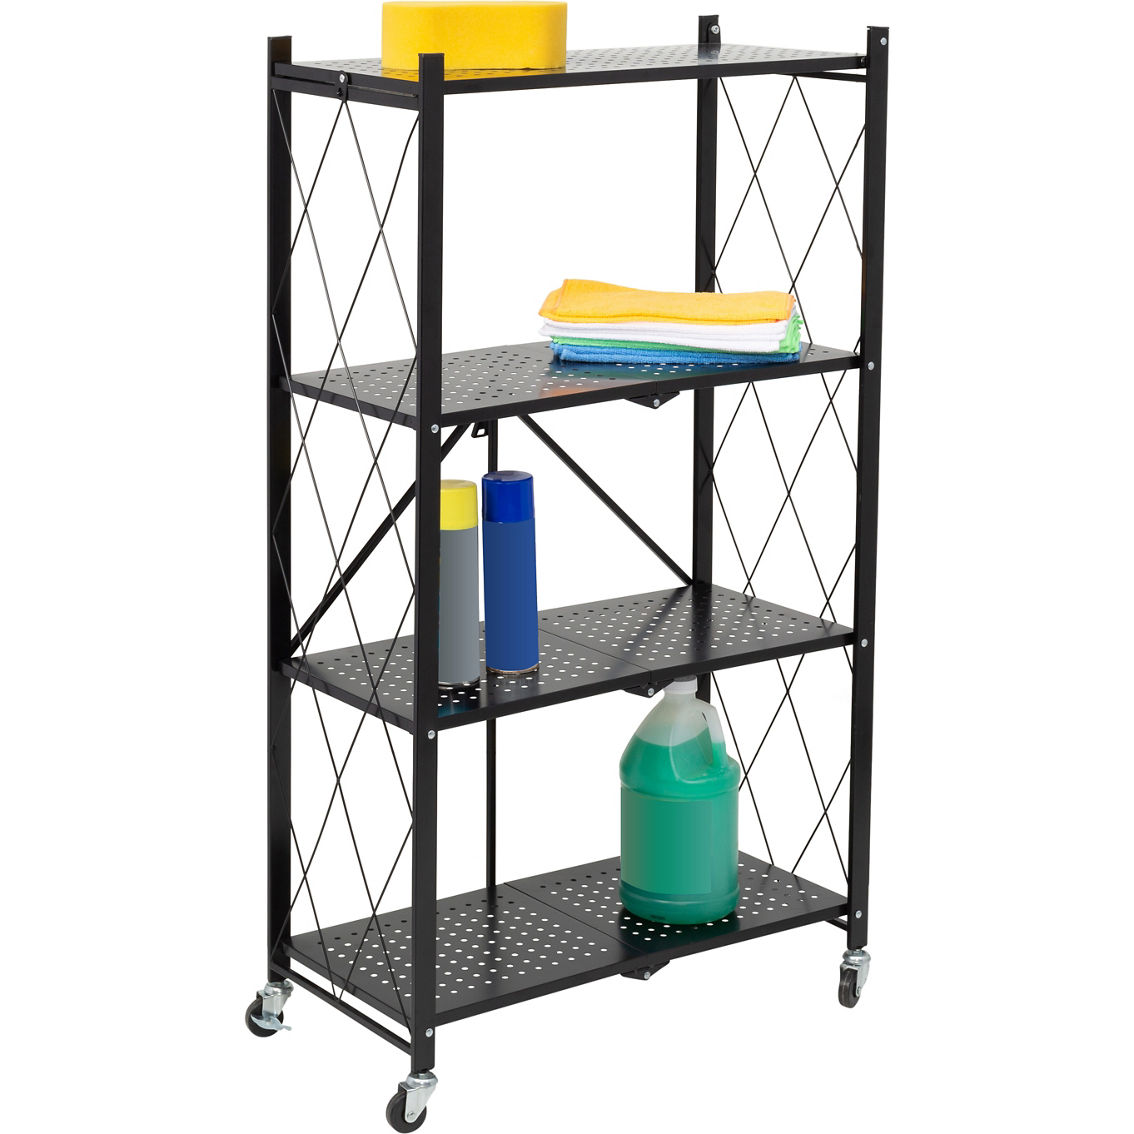 Honey Can Do Collapsible 4-Tier Metal Shelf on Wheels - Image 3 of 9